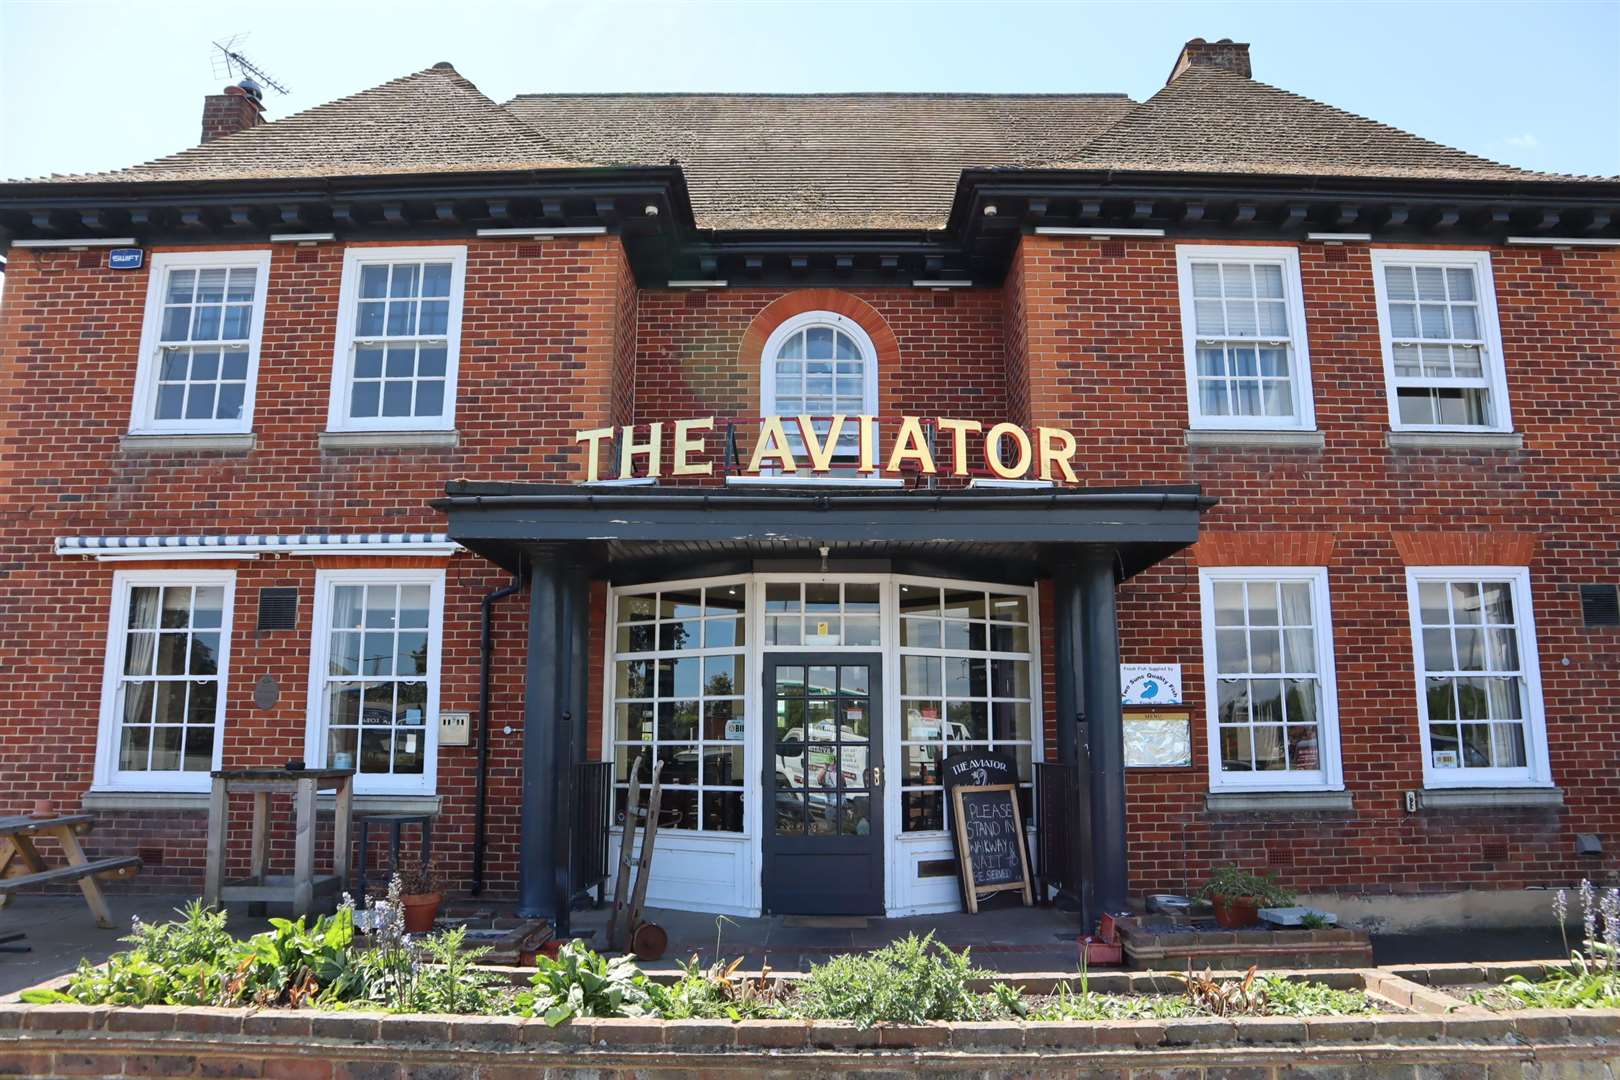 The Aviator pub at Queenborough Corner on the Isle of Sheppey